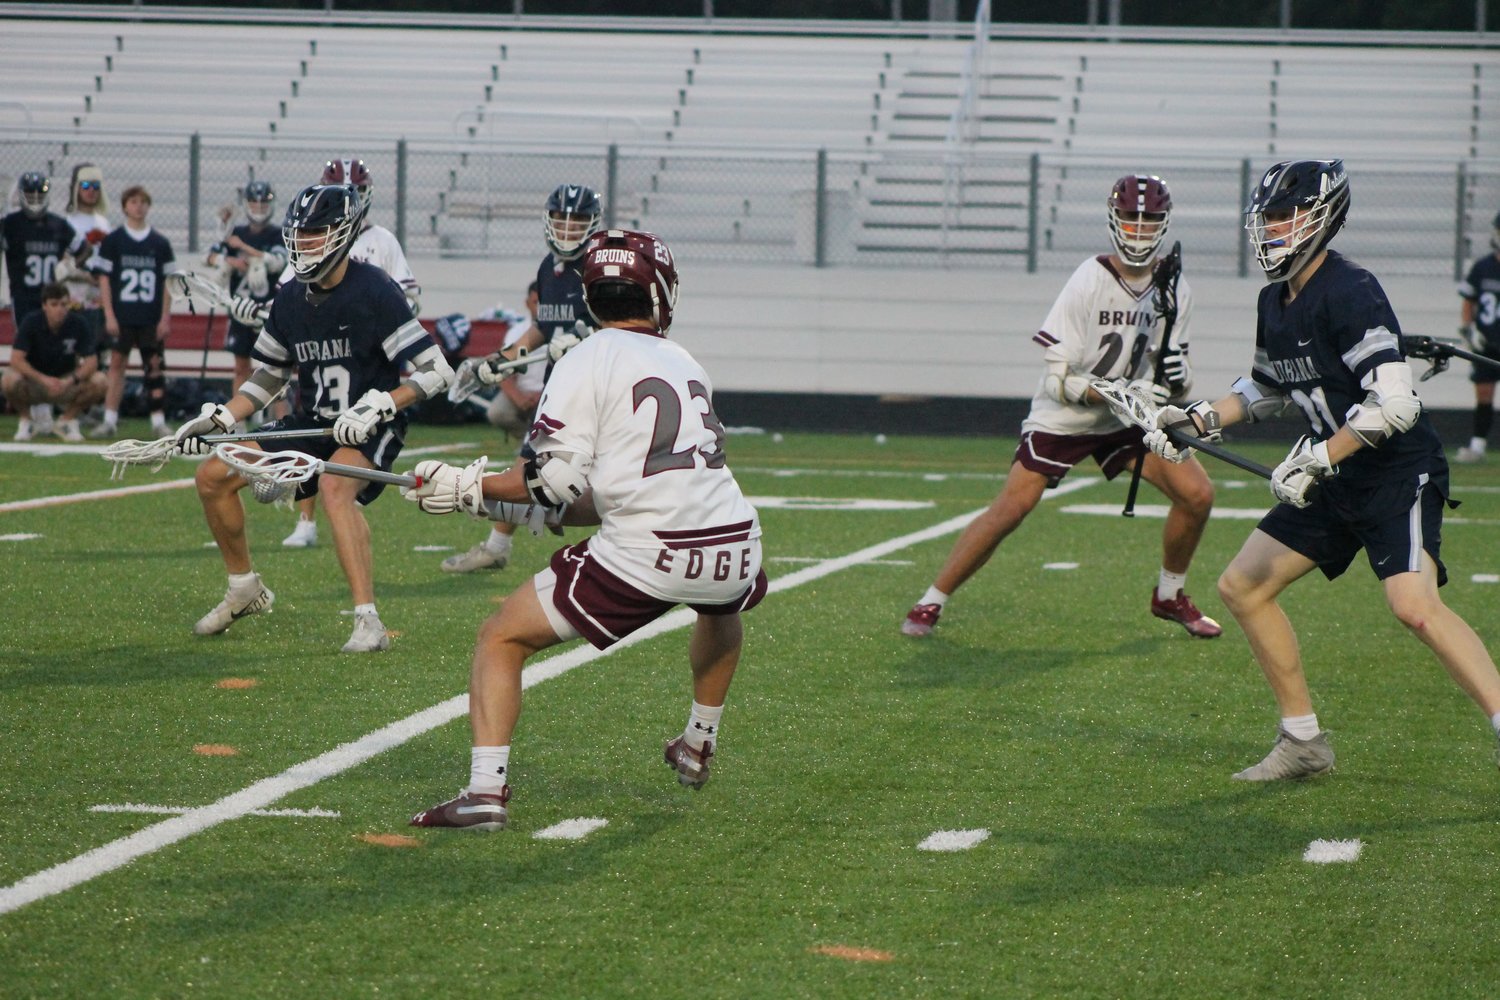 Kyle Pierce took a shot on goal during the Bruins’ semifinal win over Urbana on May 20.